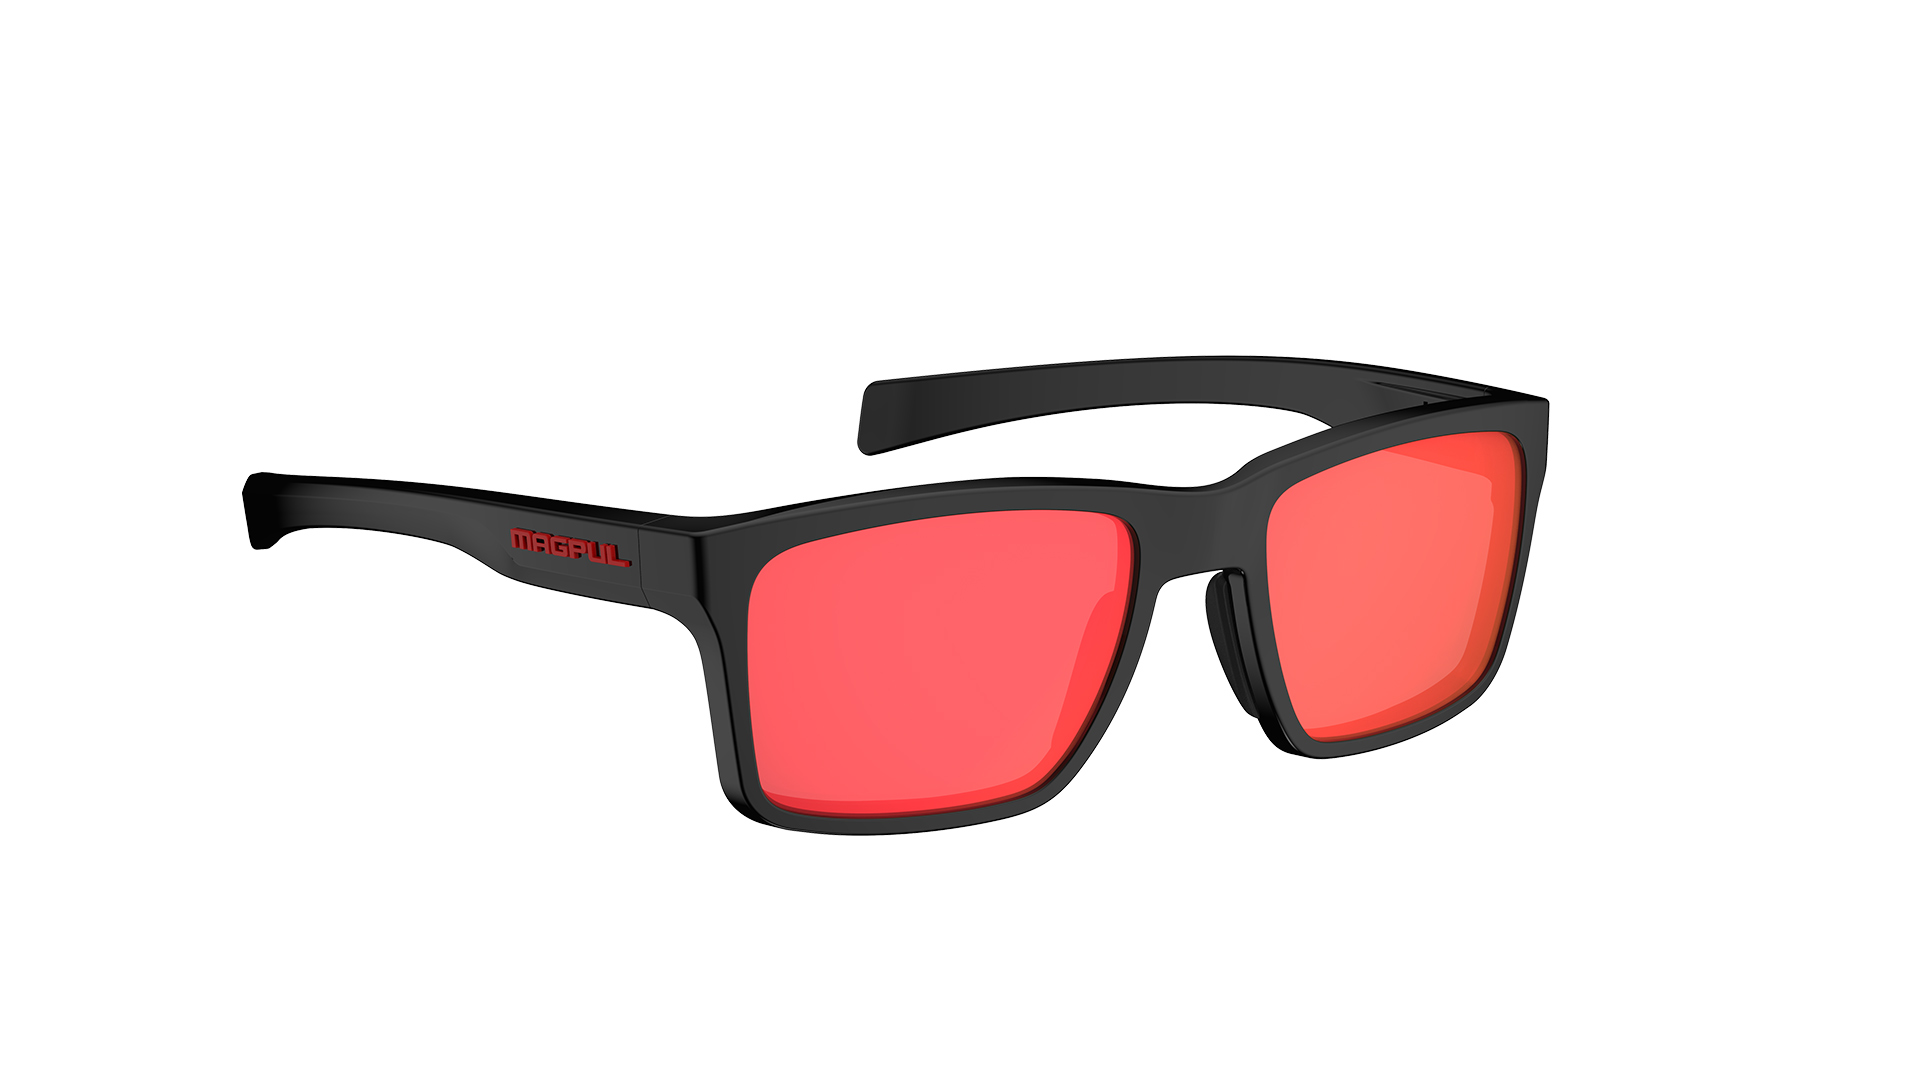 Magpul Rider with red mirror lenses